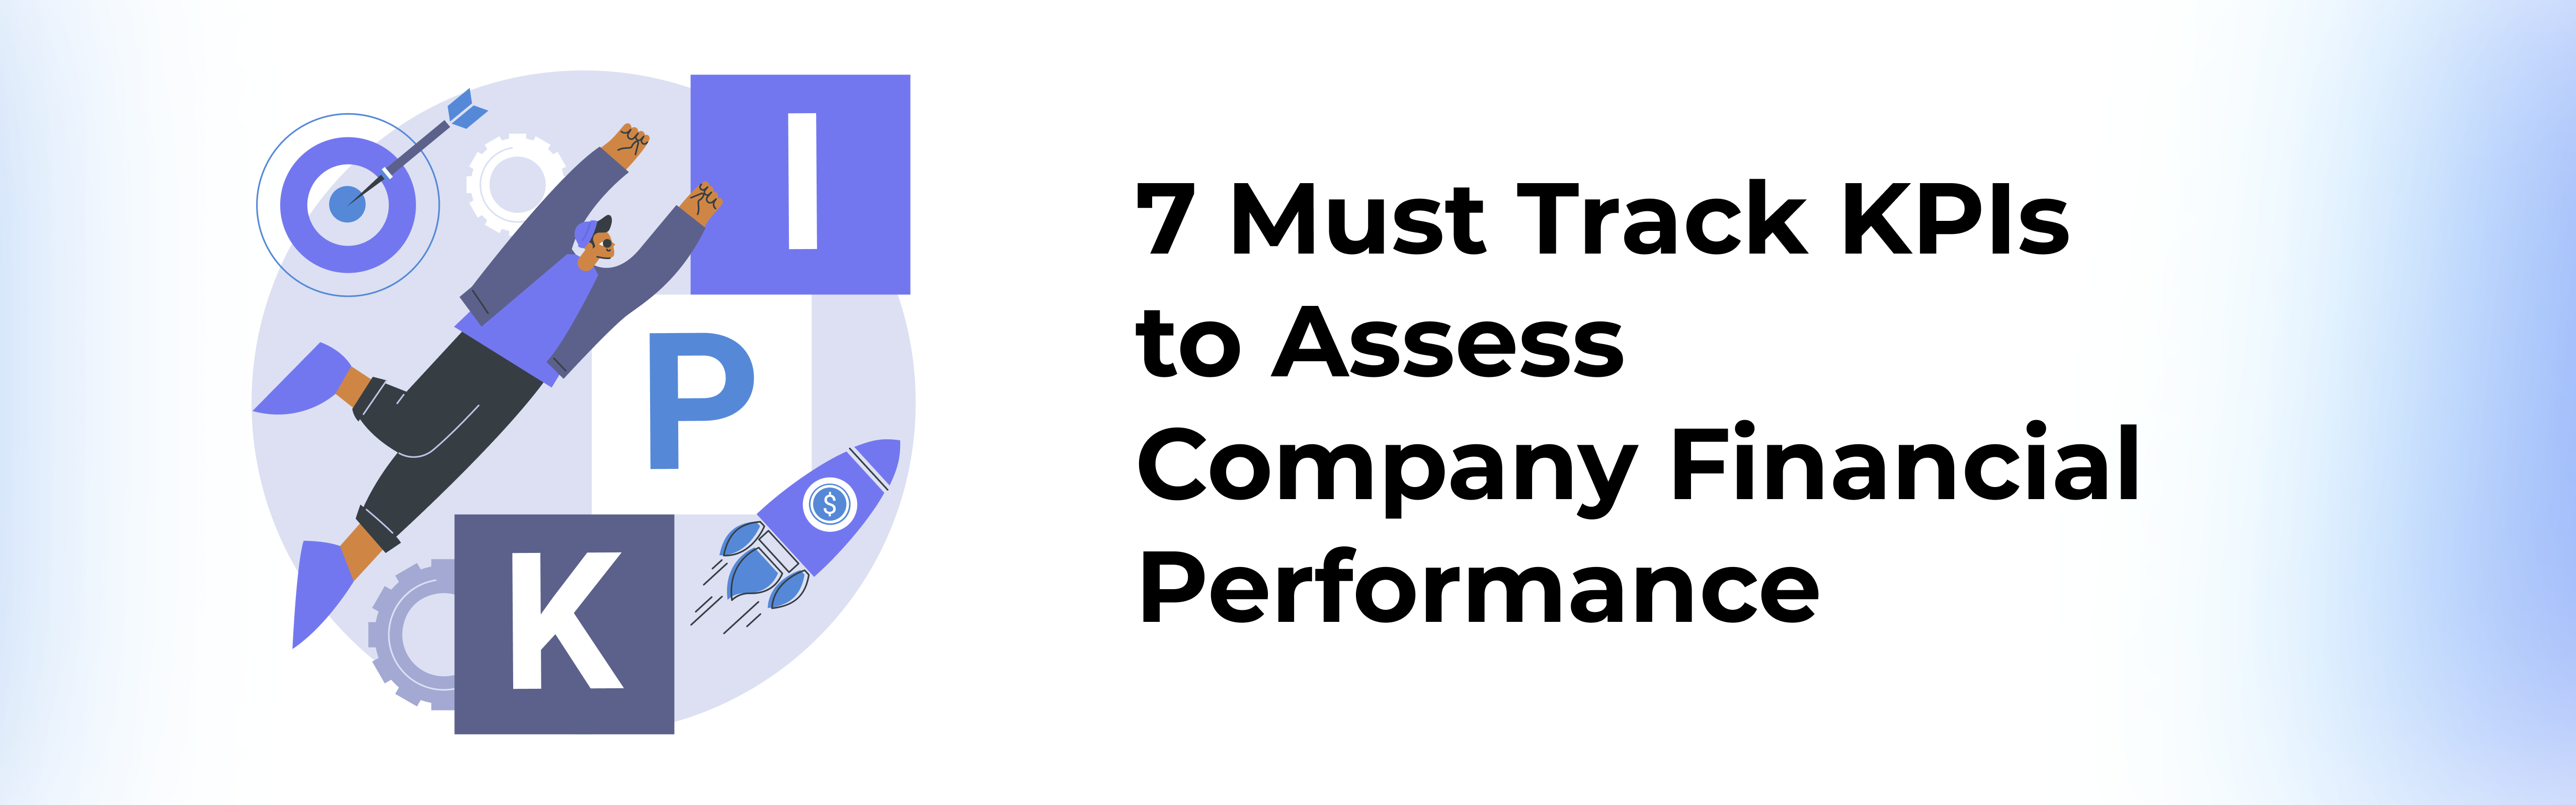 7 Must Track KPIs to Assess Company Financial Performance